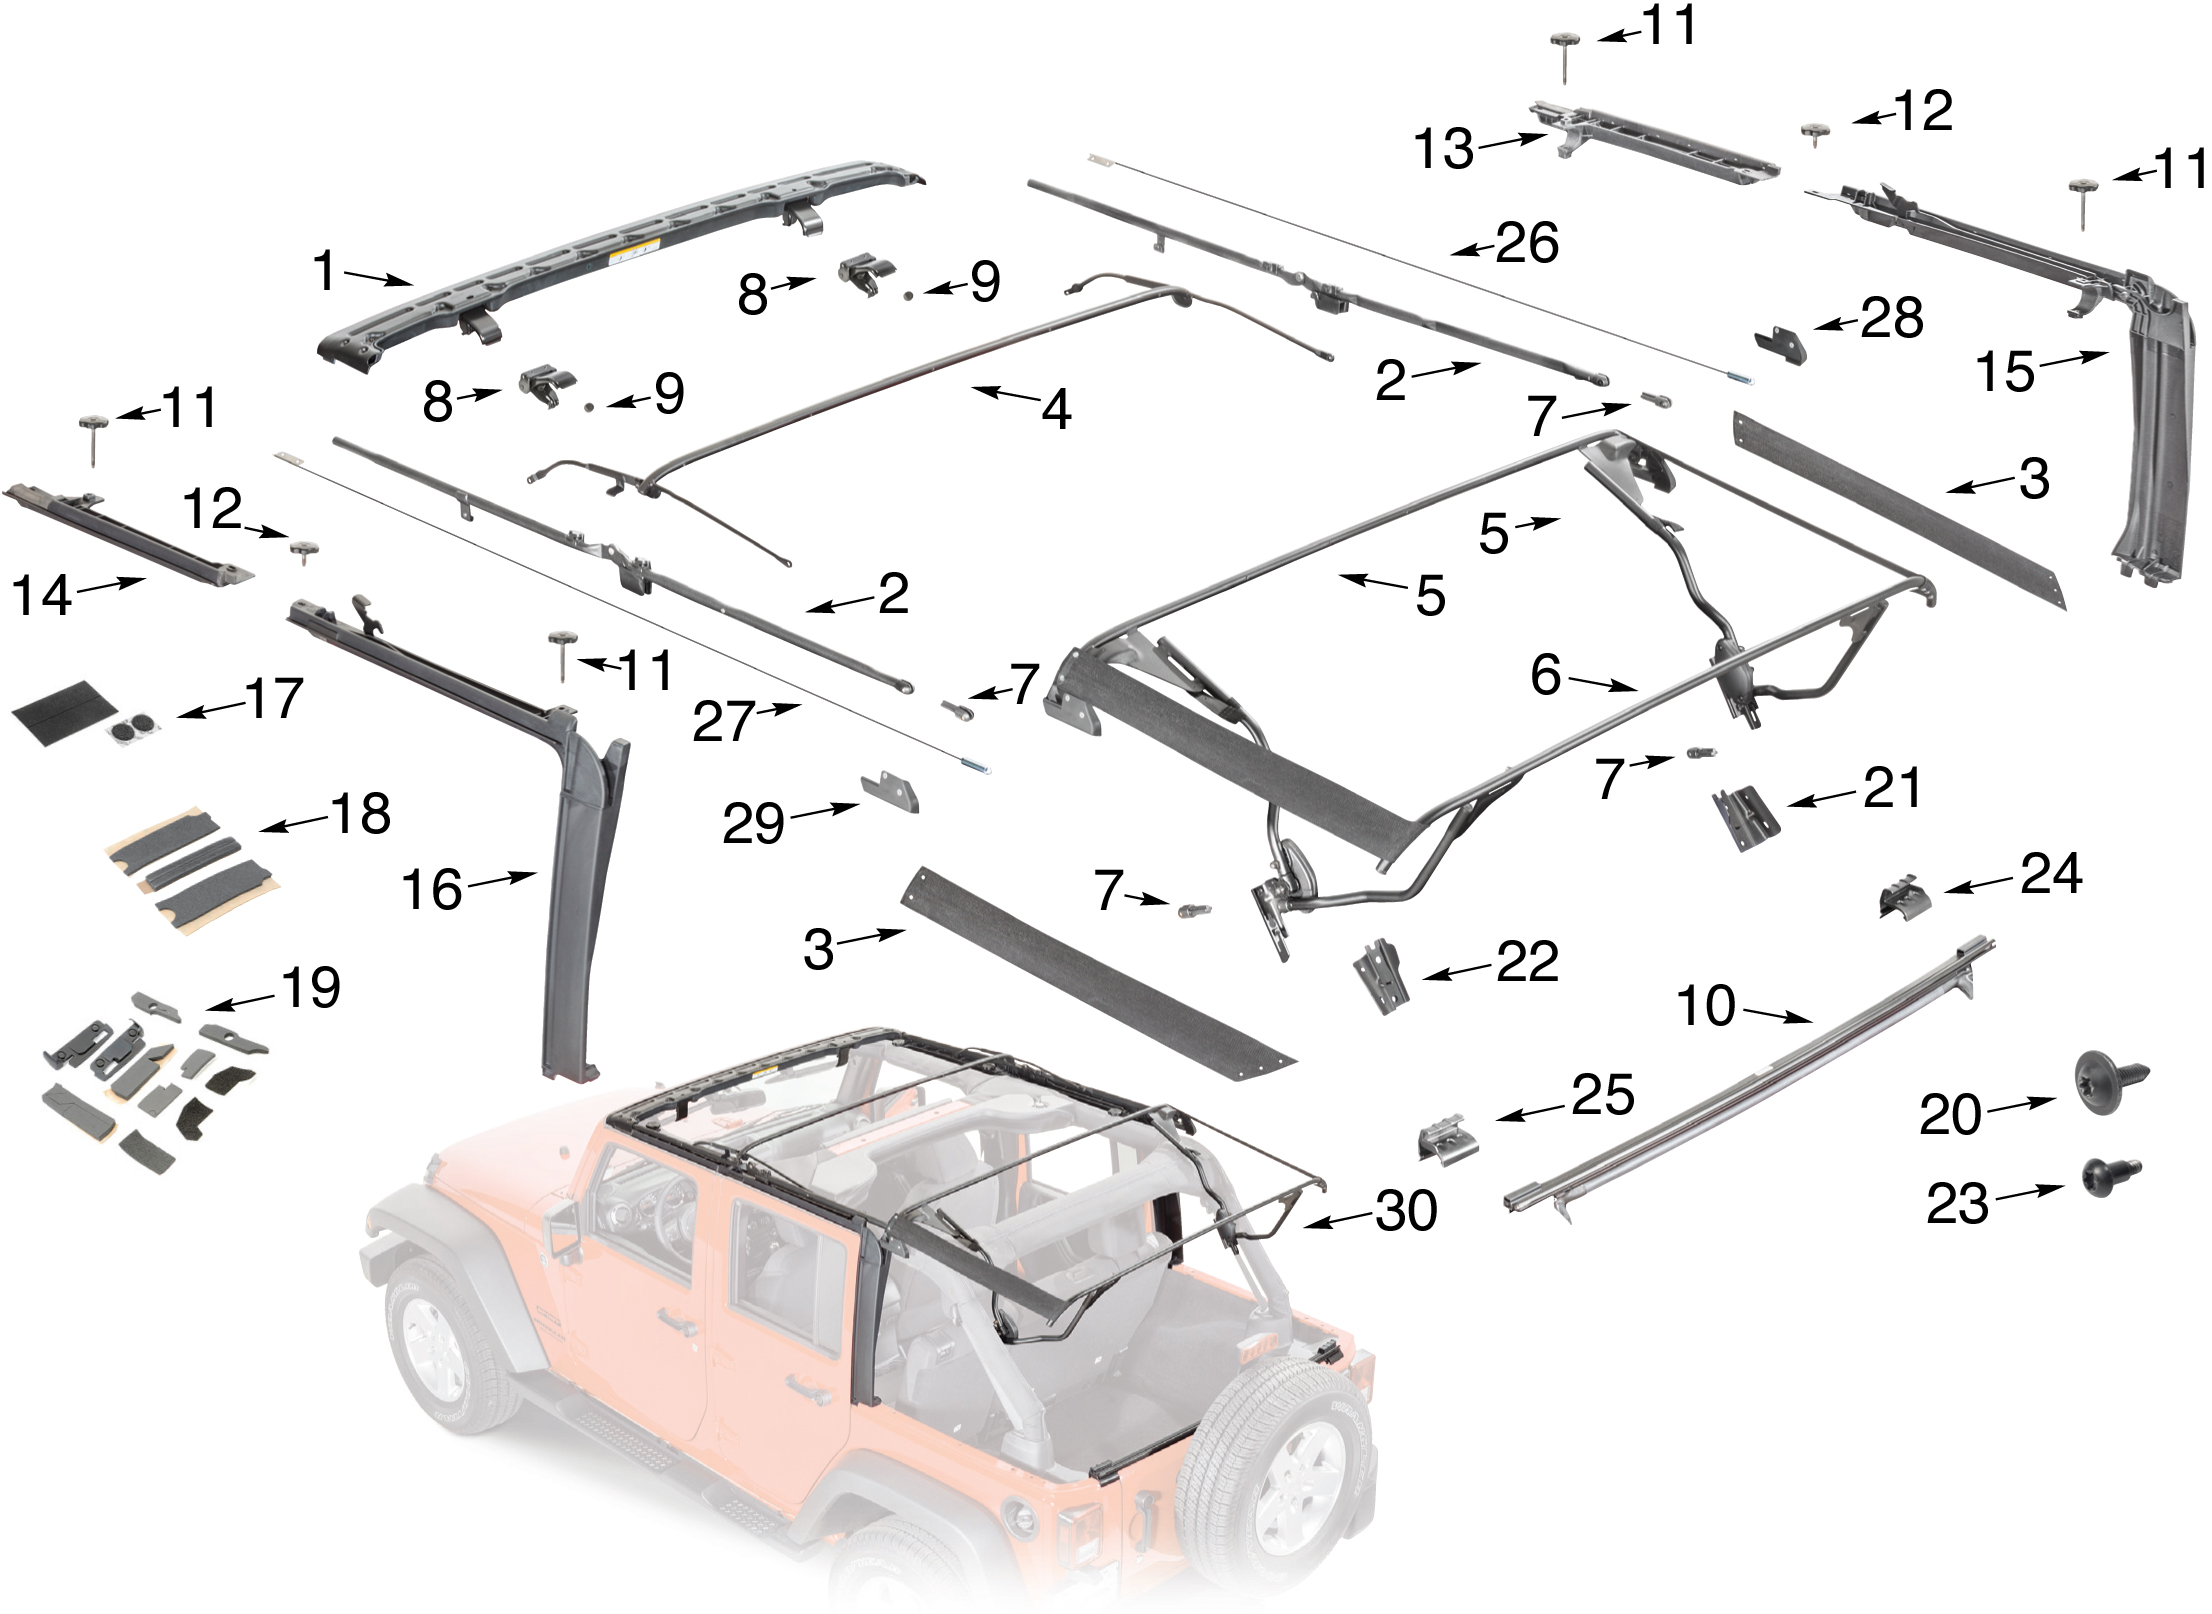 2012 Rubicon - Soft Top Missing Parts ?? | Jeep Wrangler Forum